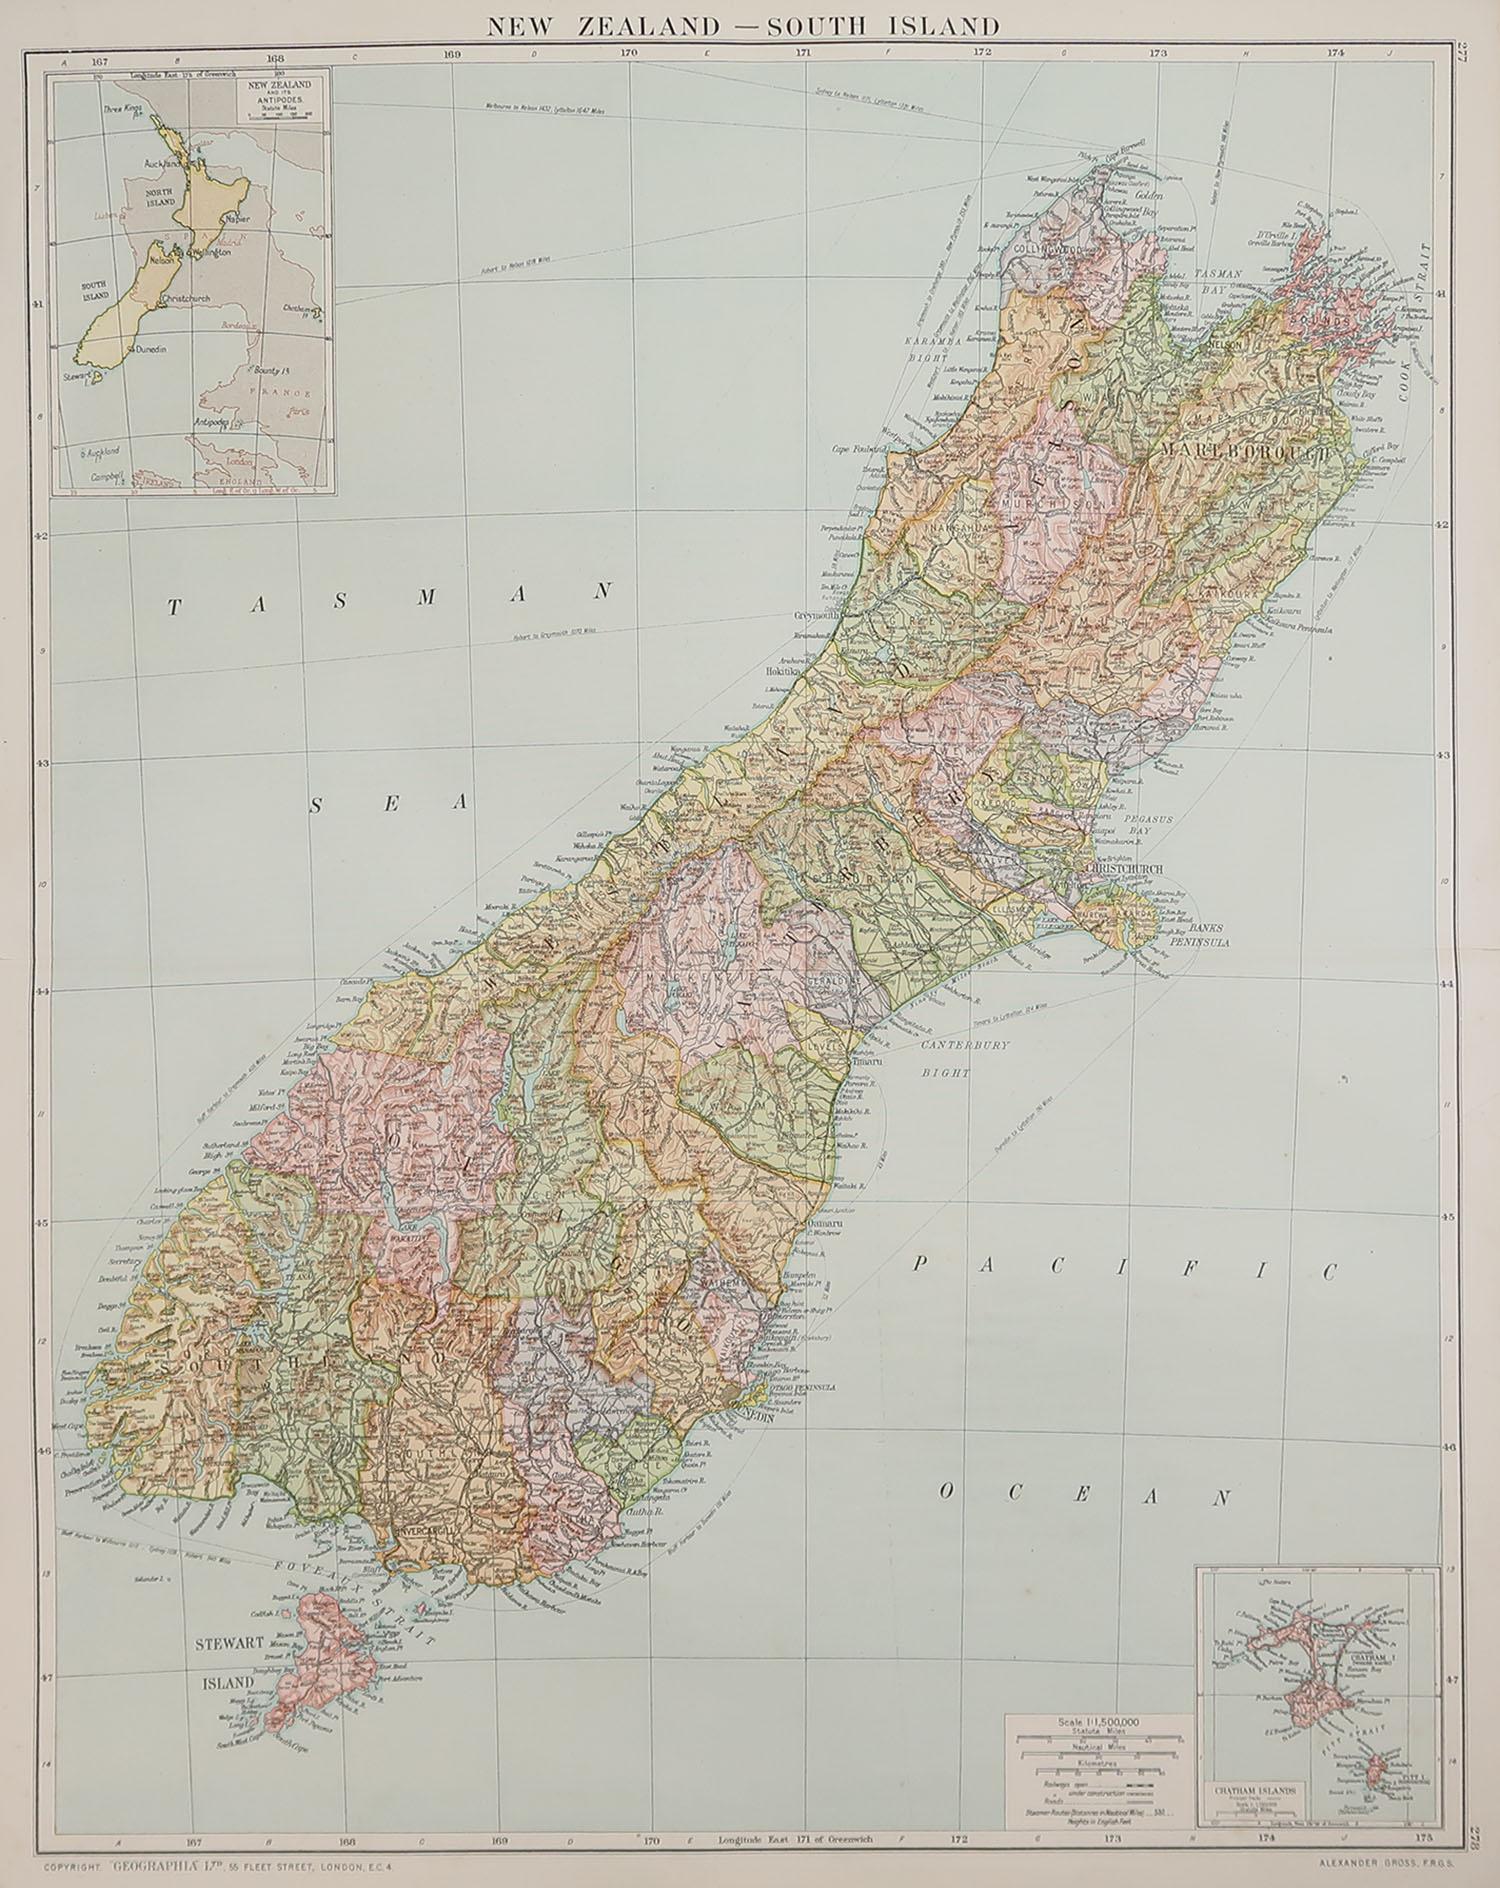 Great map of South Island, New Zealand

Original color. 

Good condition / repair to a minor tear on right edge 

Published by Alexander Gross

Unframed.








